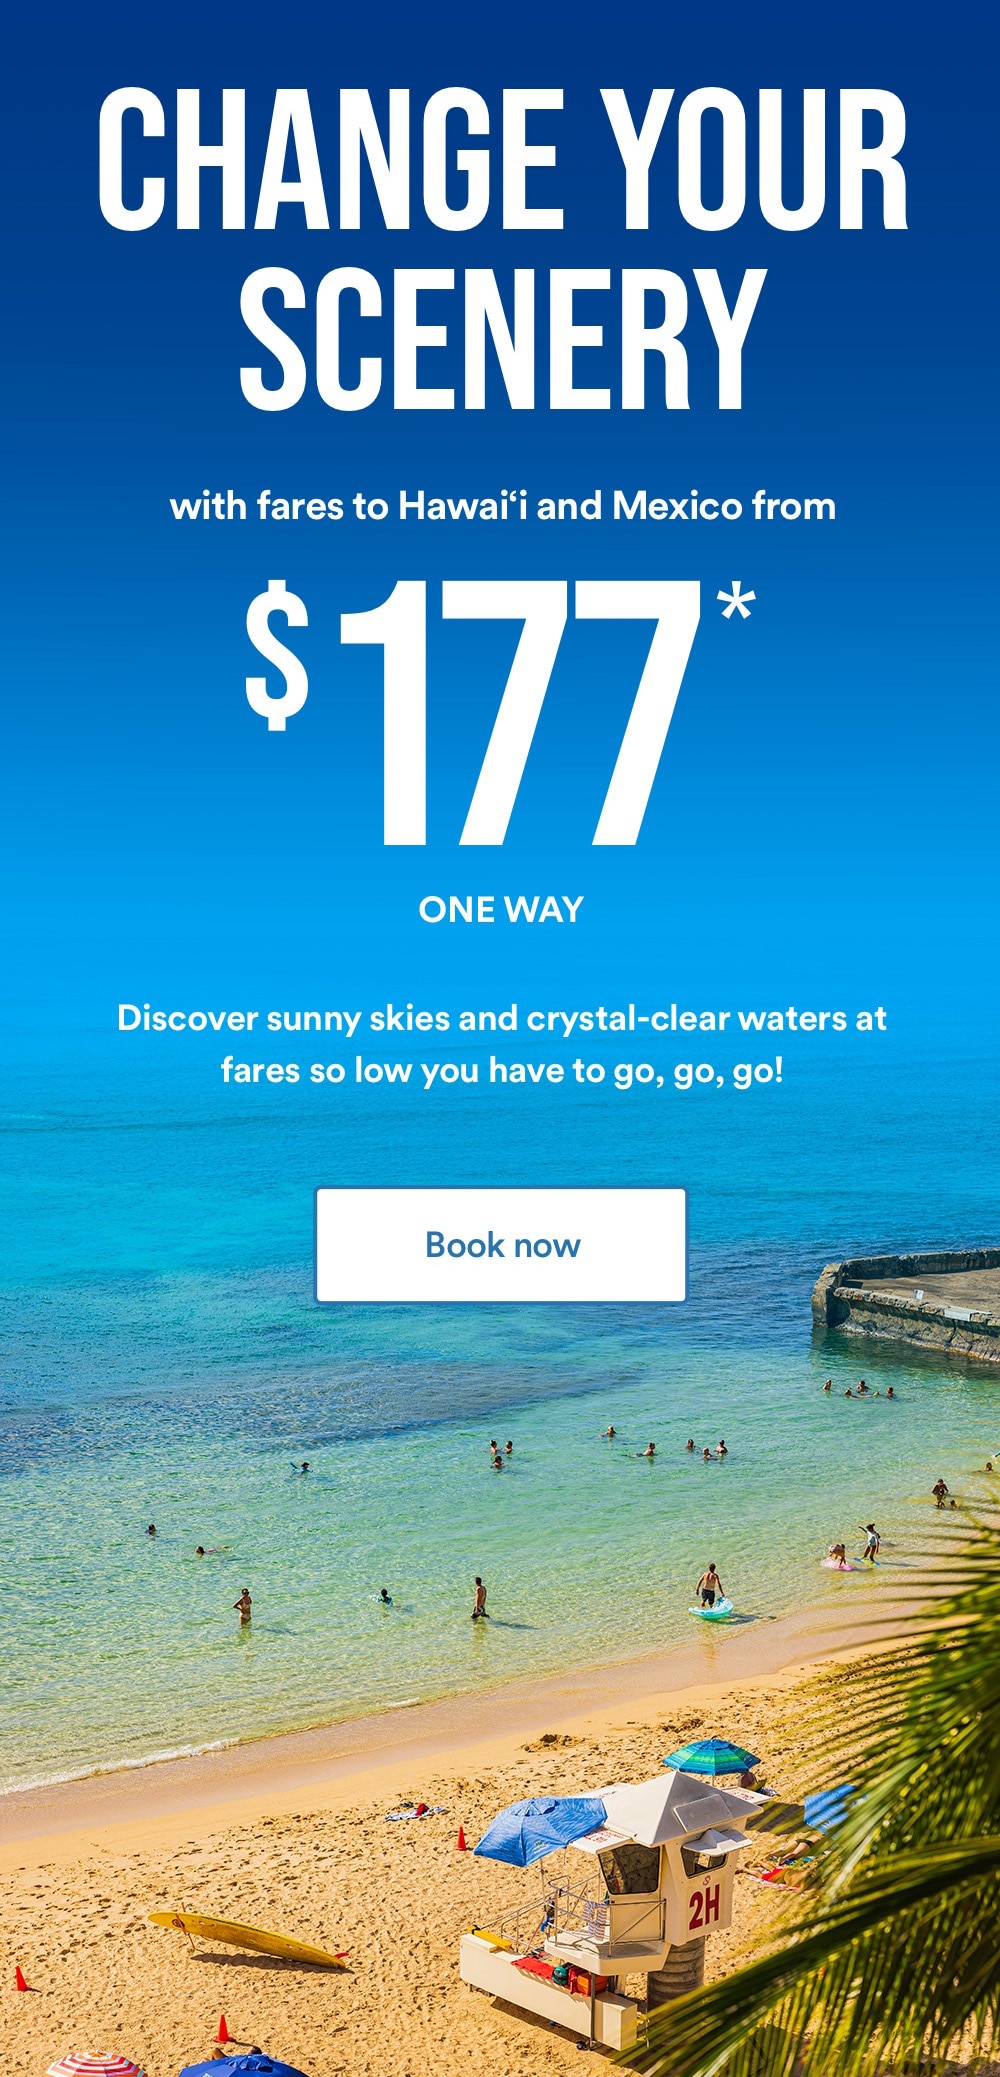 Change your scenery with Hawai'i fares from $177*.